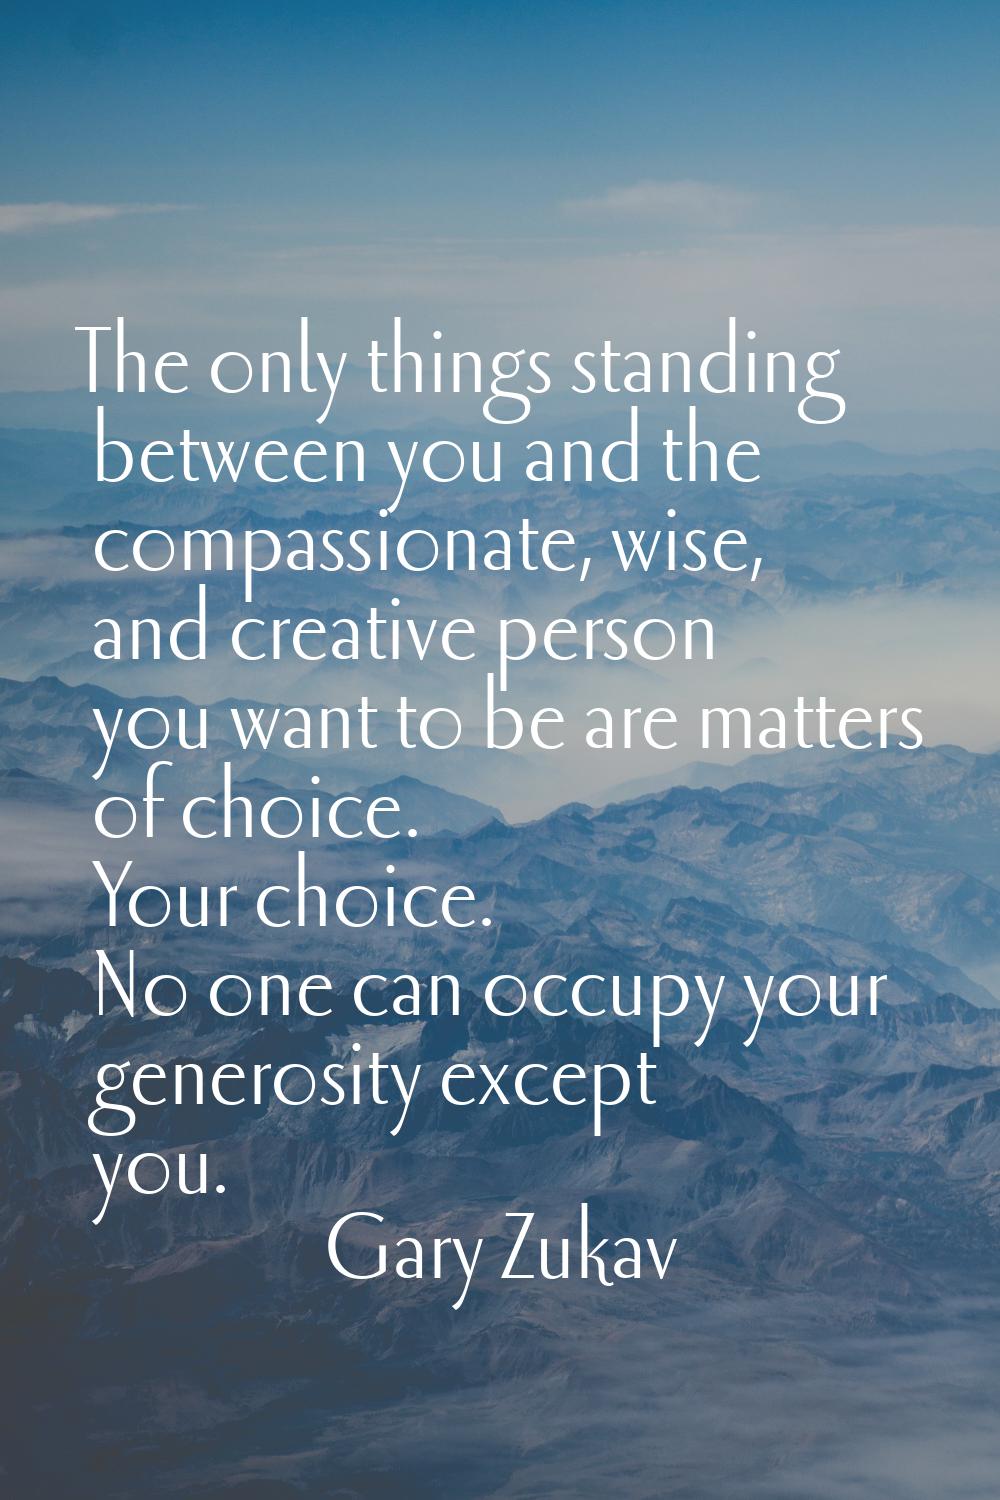 The only things standing between you and the compassionate, wise, and creative person you want to b